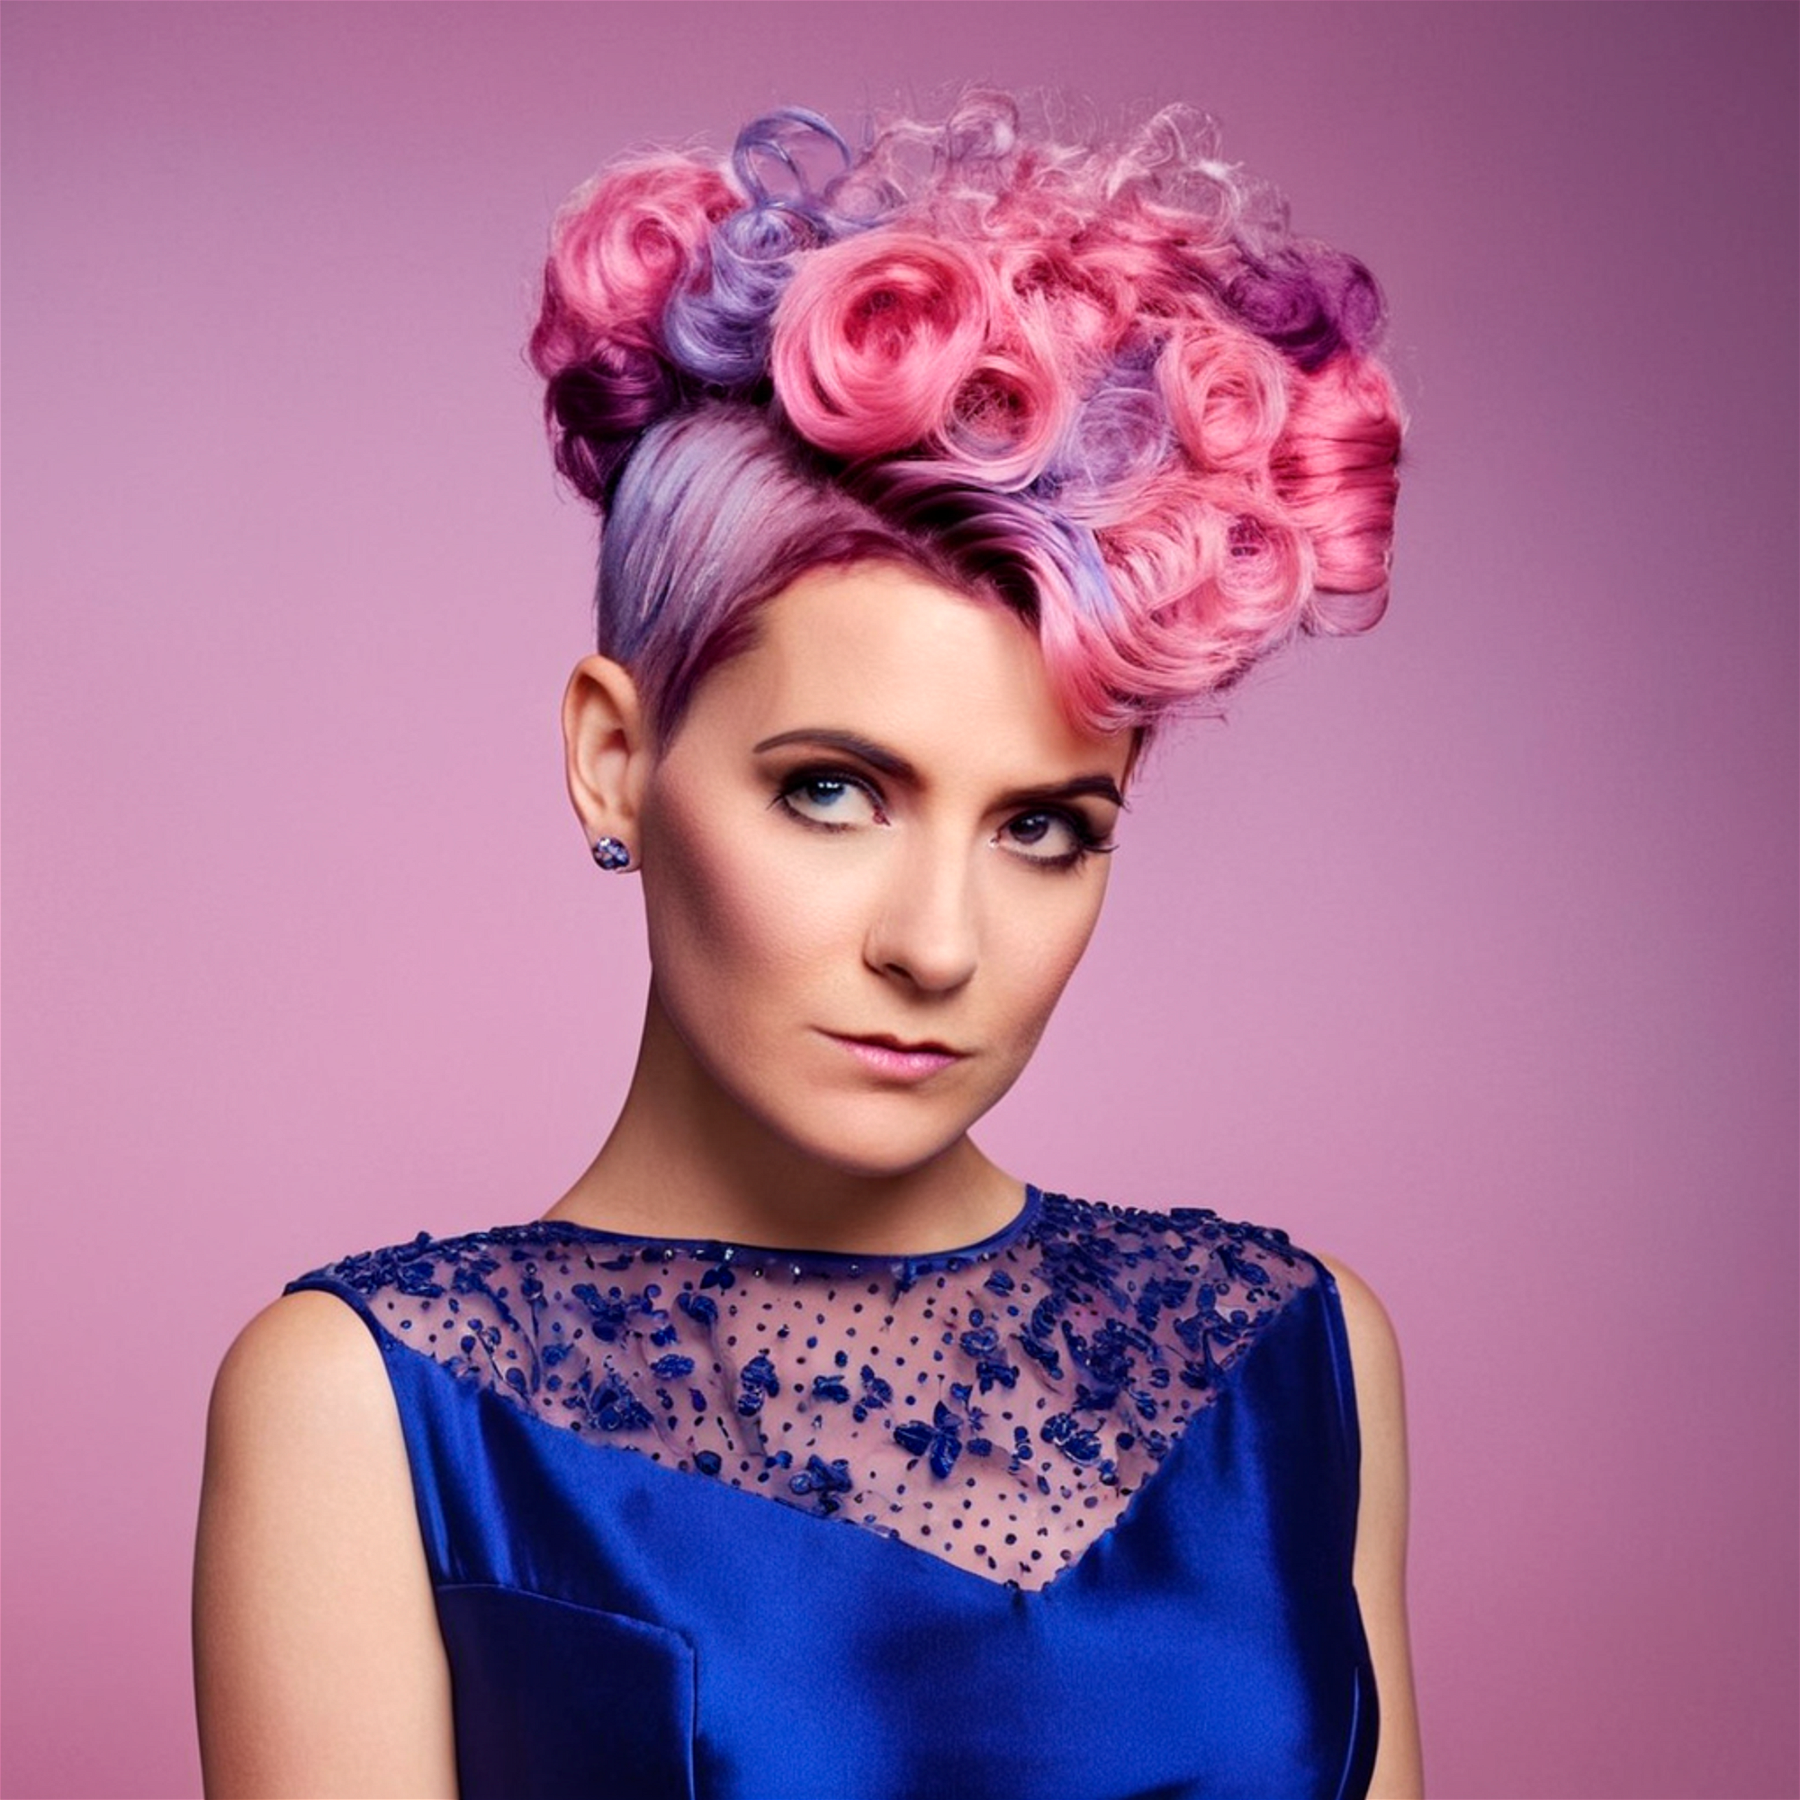 Crazy punk hairstyle, pink and purple hair